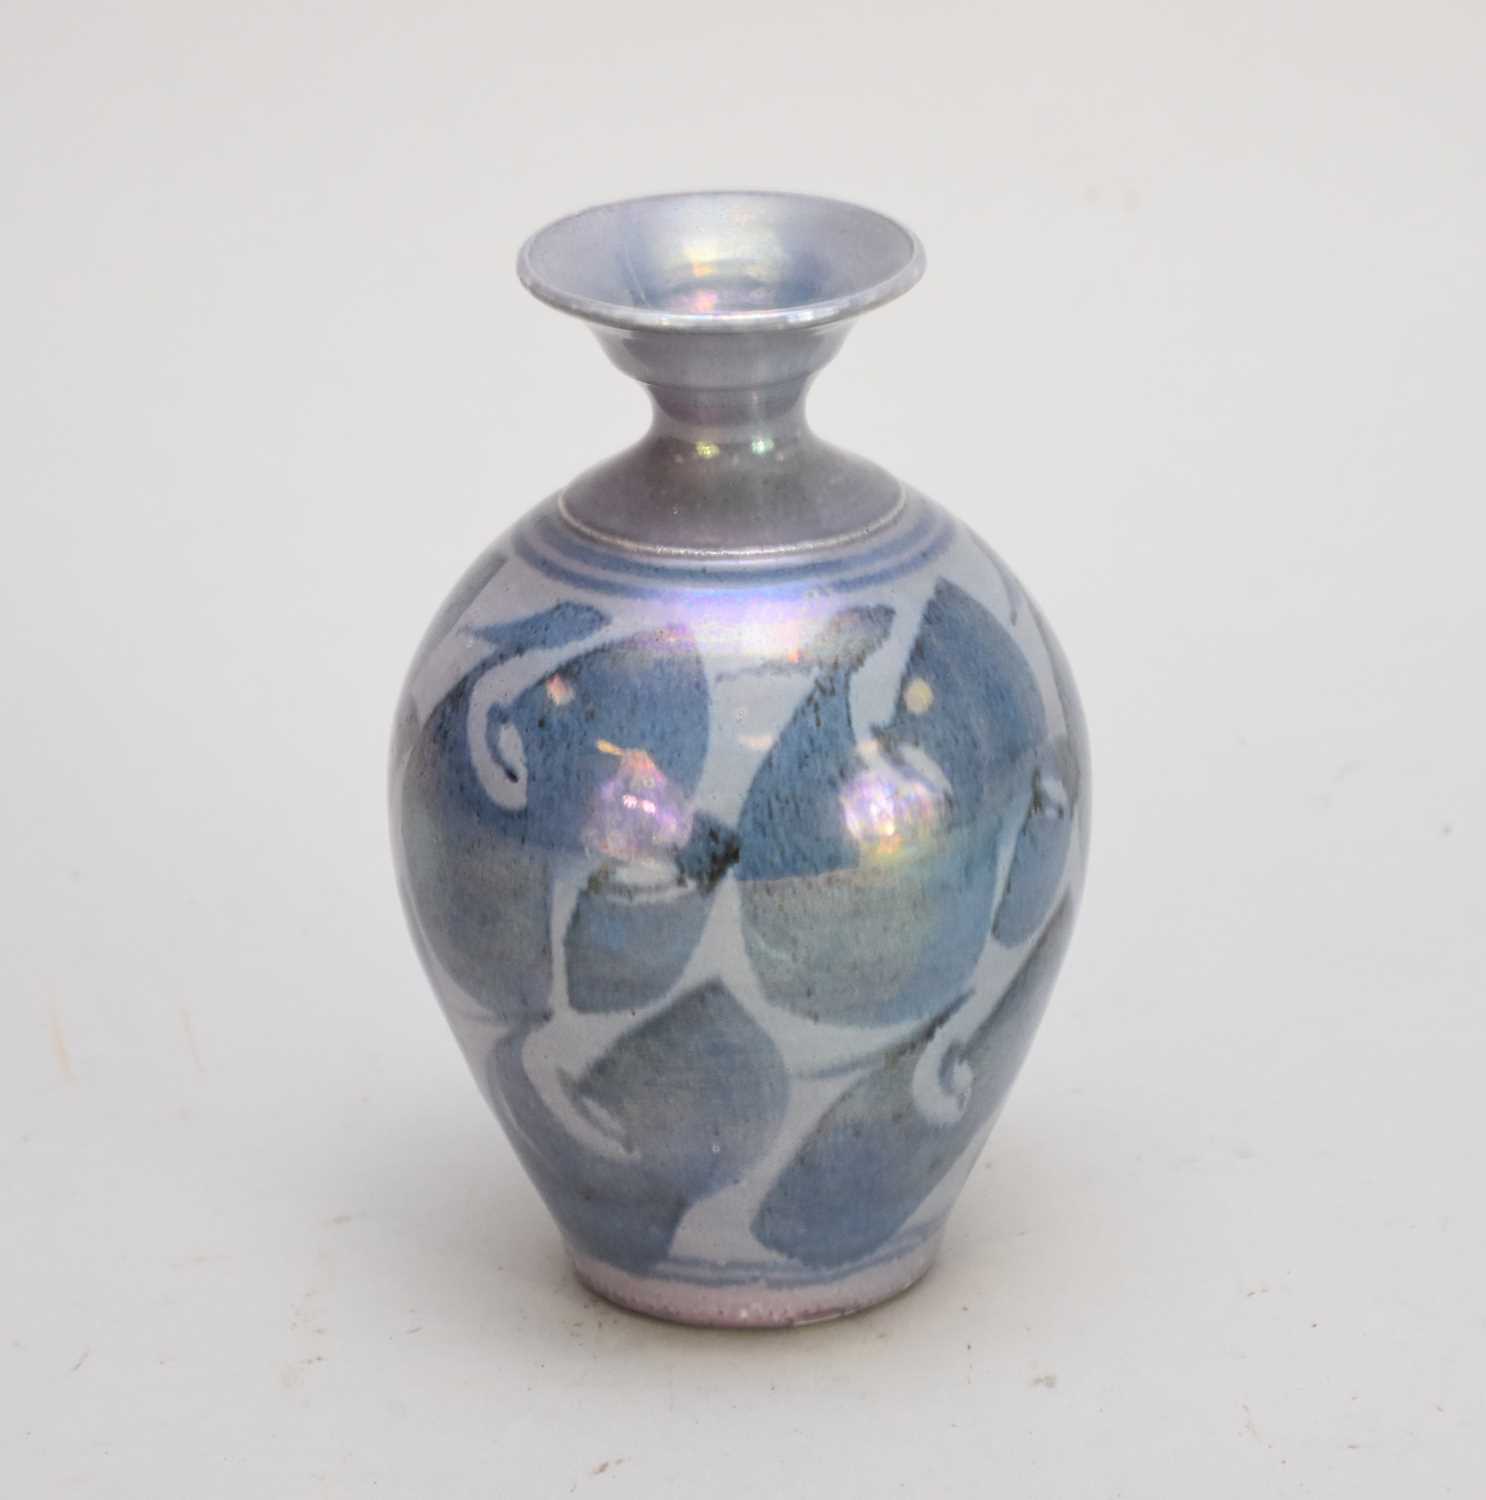 A small purple lustre vase decorated in a style similar to Alan Caiger-Smith